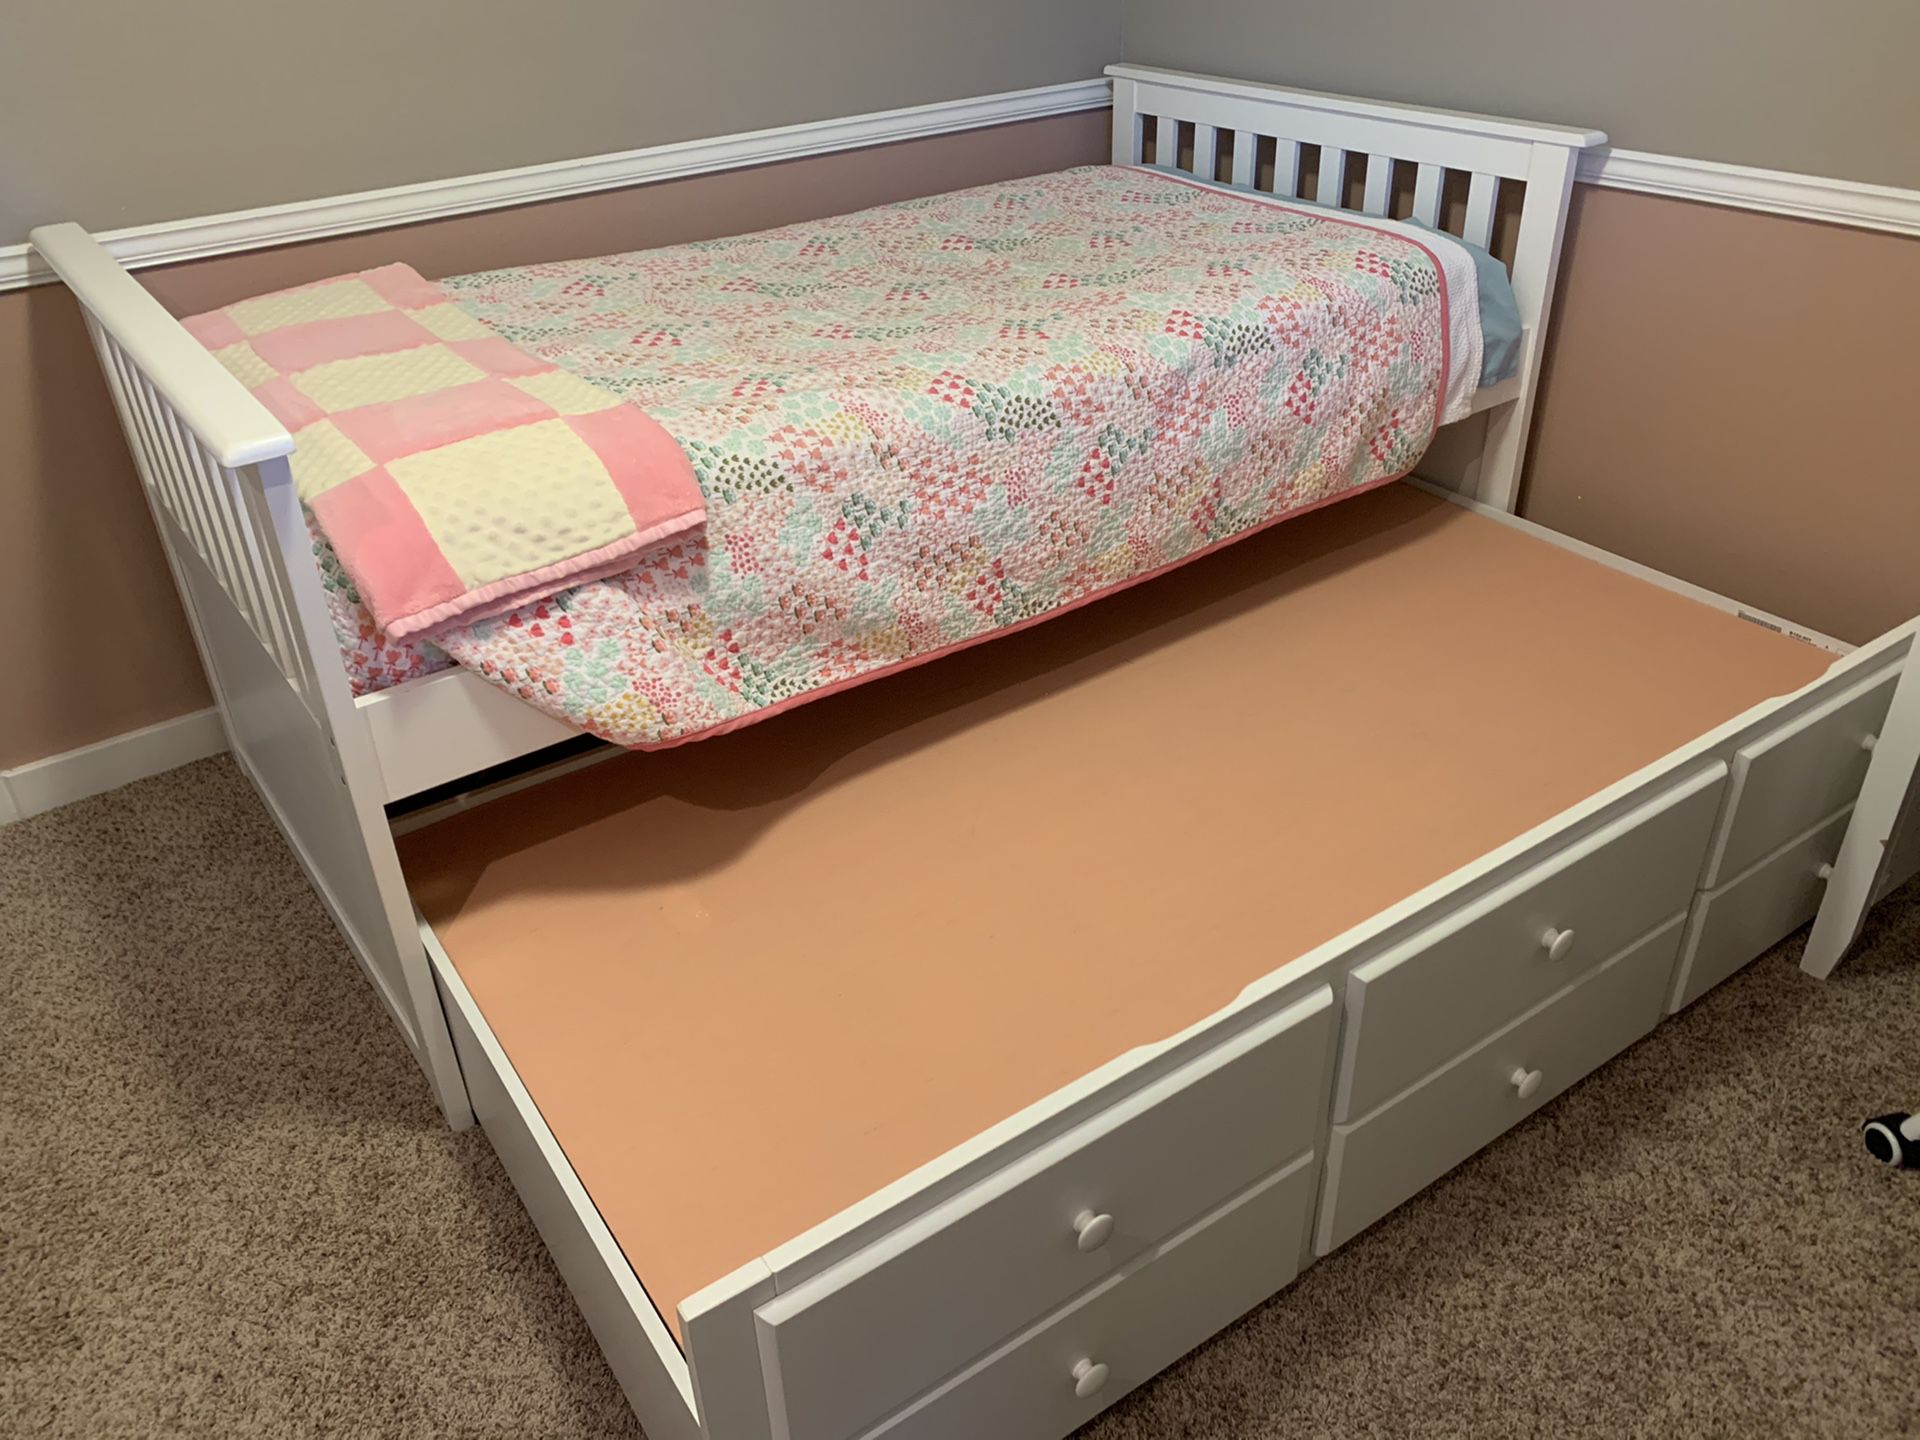 Ashley furniture “Lulu” twin over twin trundle bed with drawer storage.